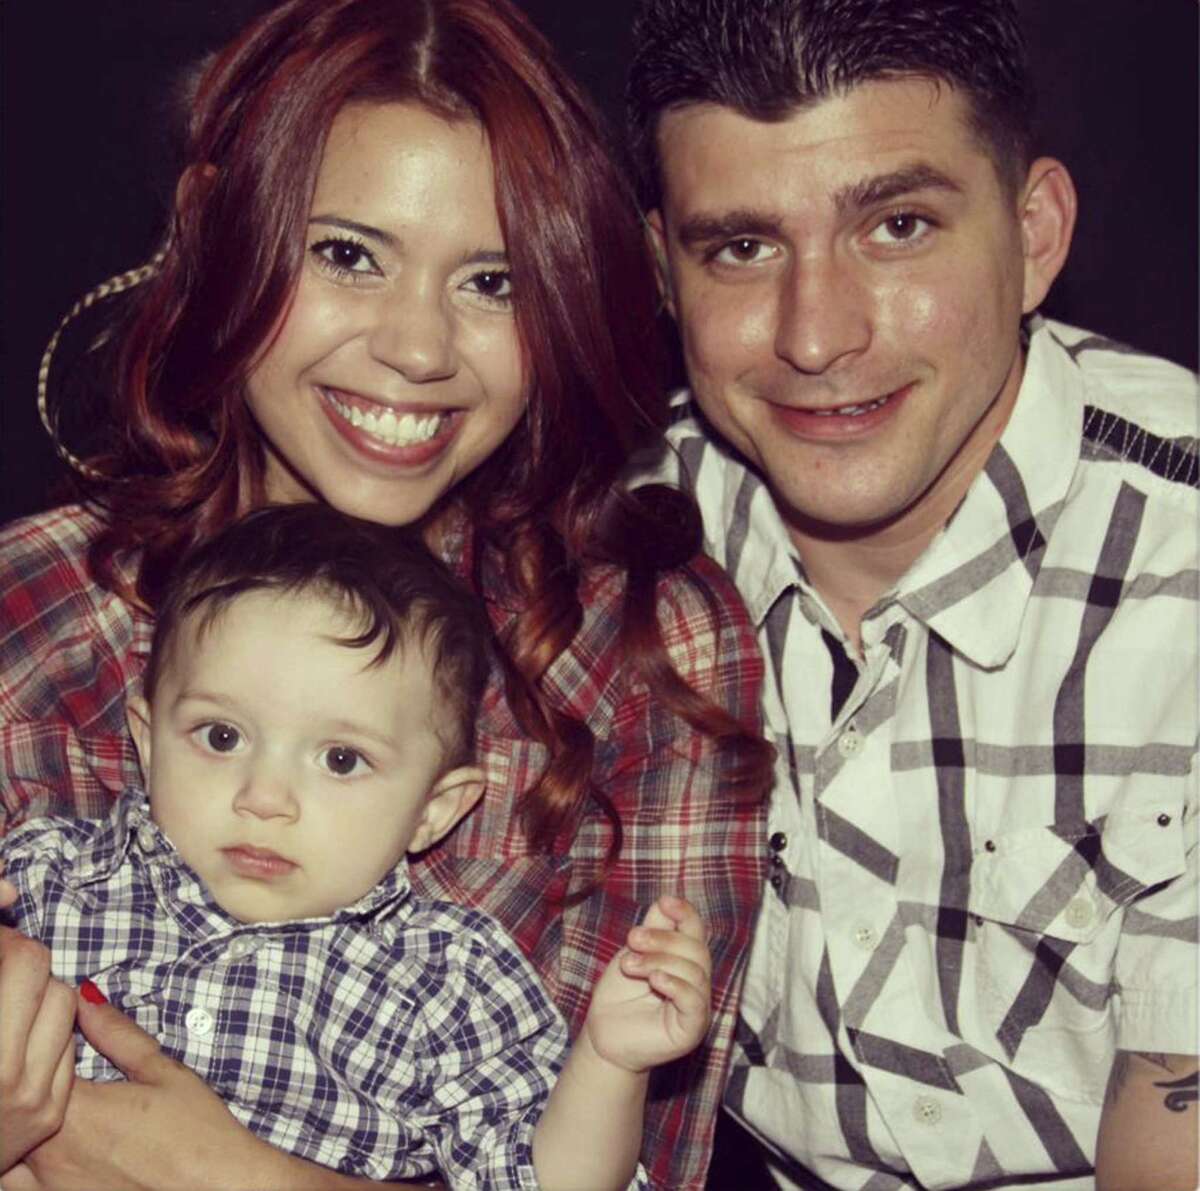 Restaurant worker Mathew Jackson, 29, with his wife, Erica Fitts, 28, and their son, Jasper, who now is 3 years old.